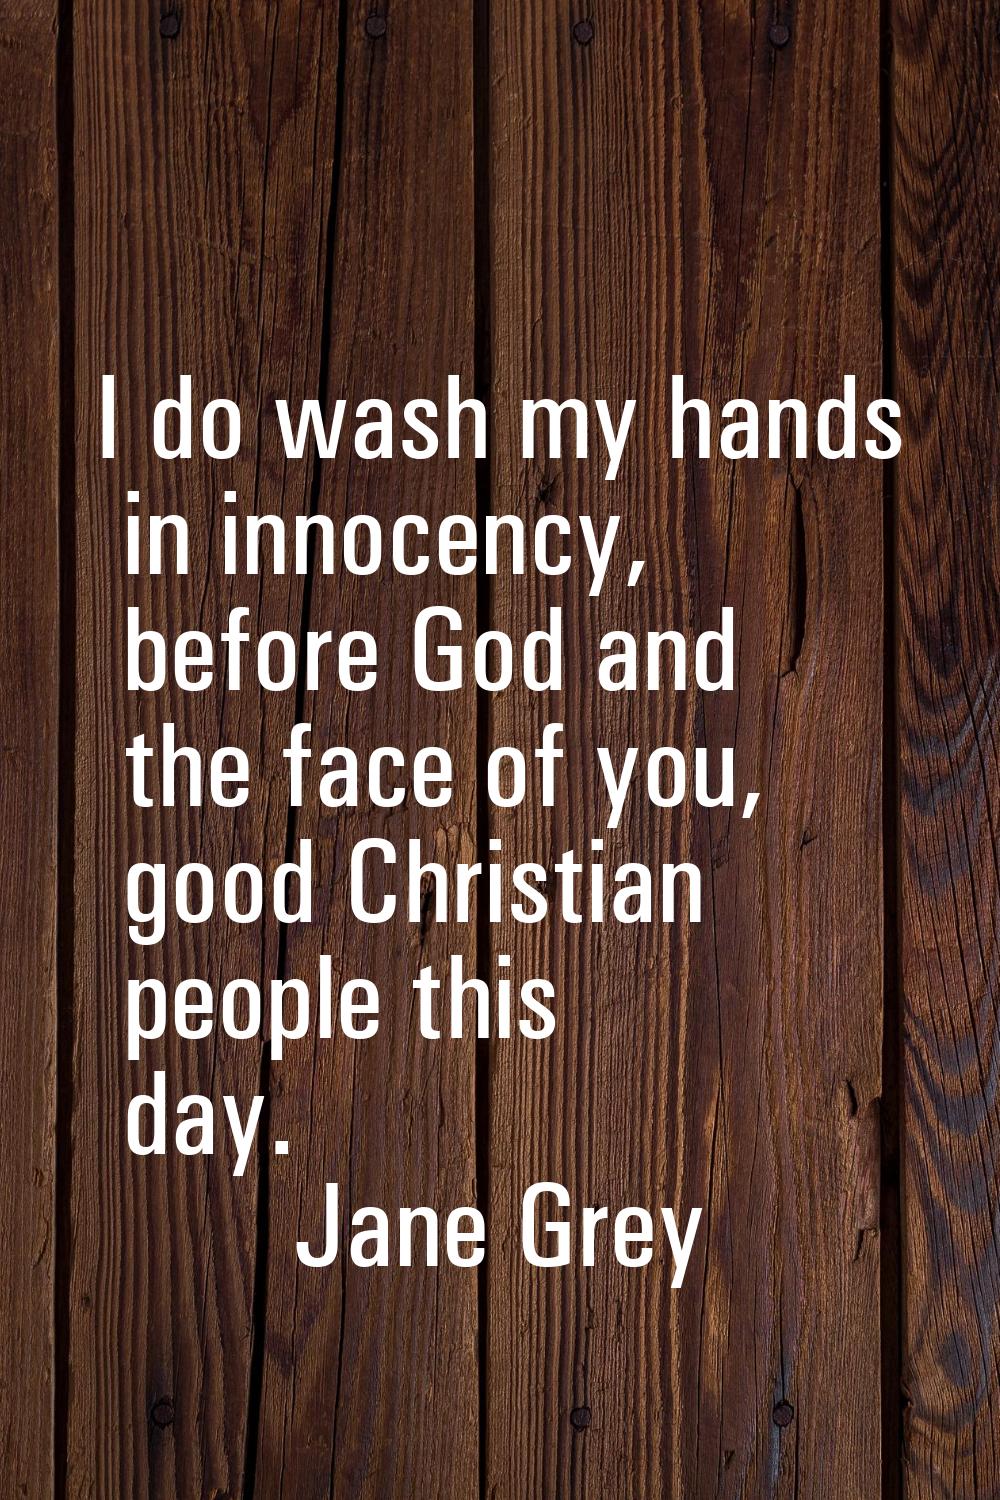 I do wash my hands in innocency, before God and the face of you, good Christian people this day.